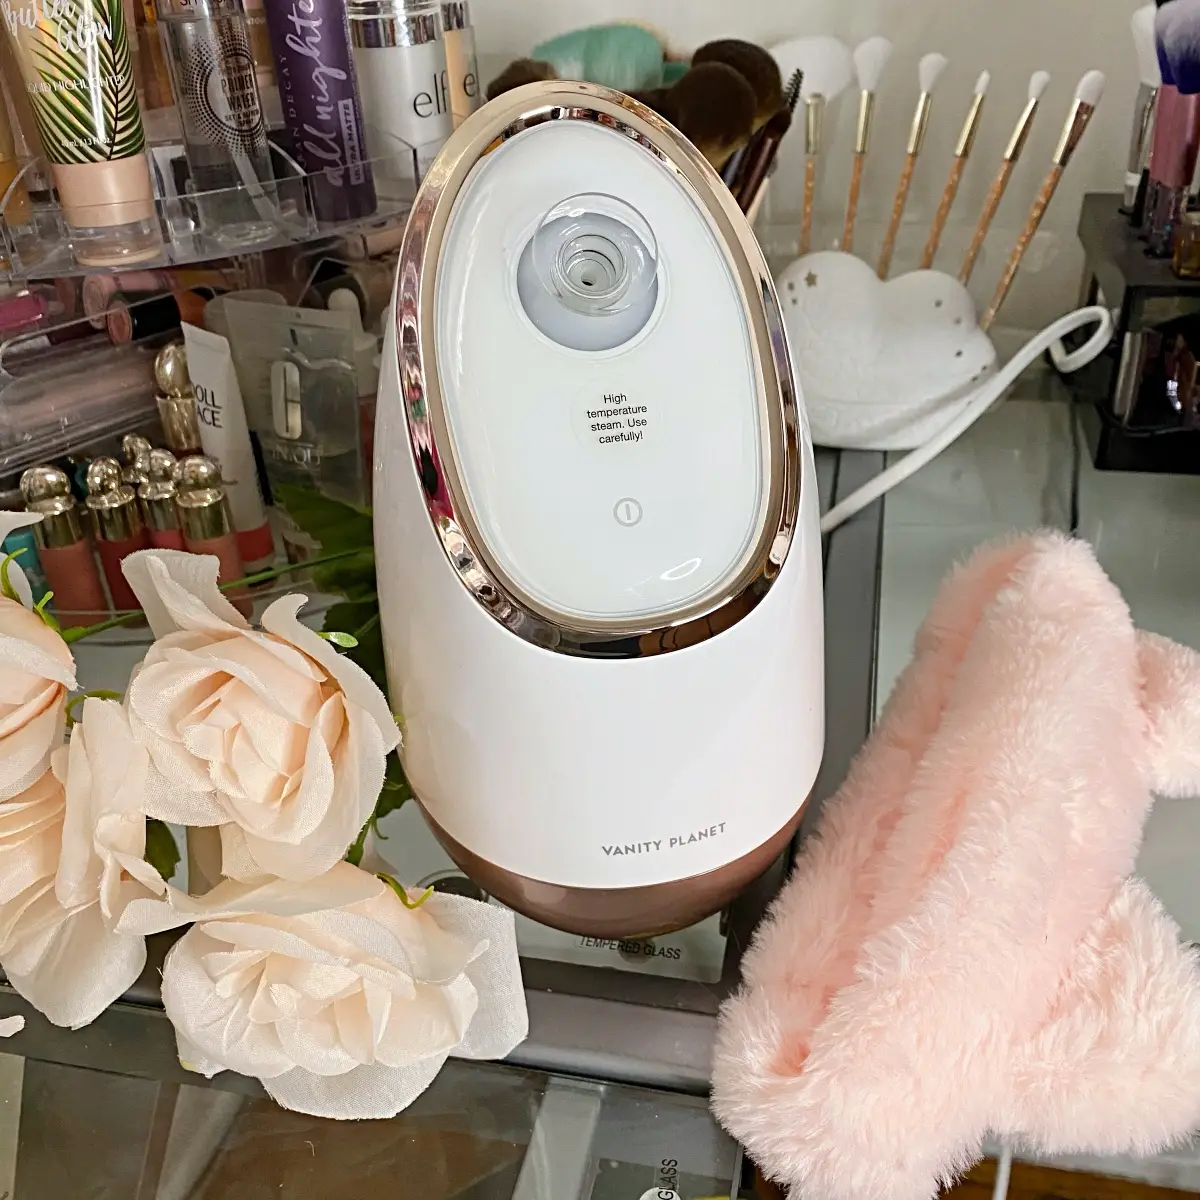 Vanity Planet Facial Steamer Review